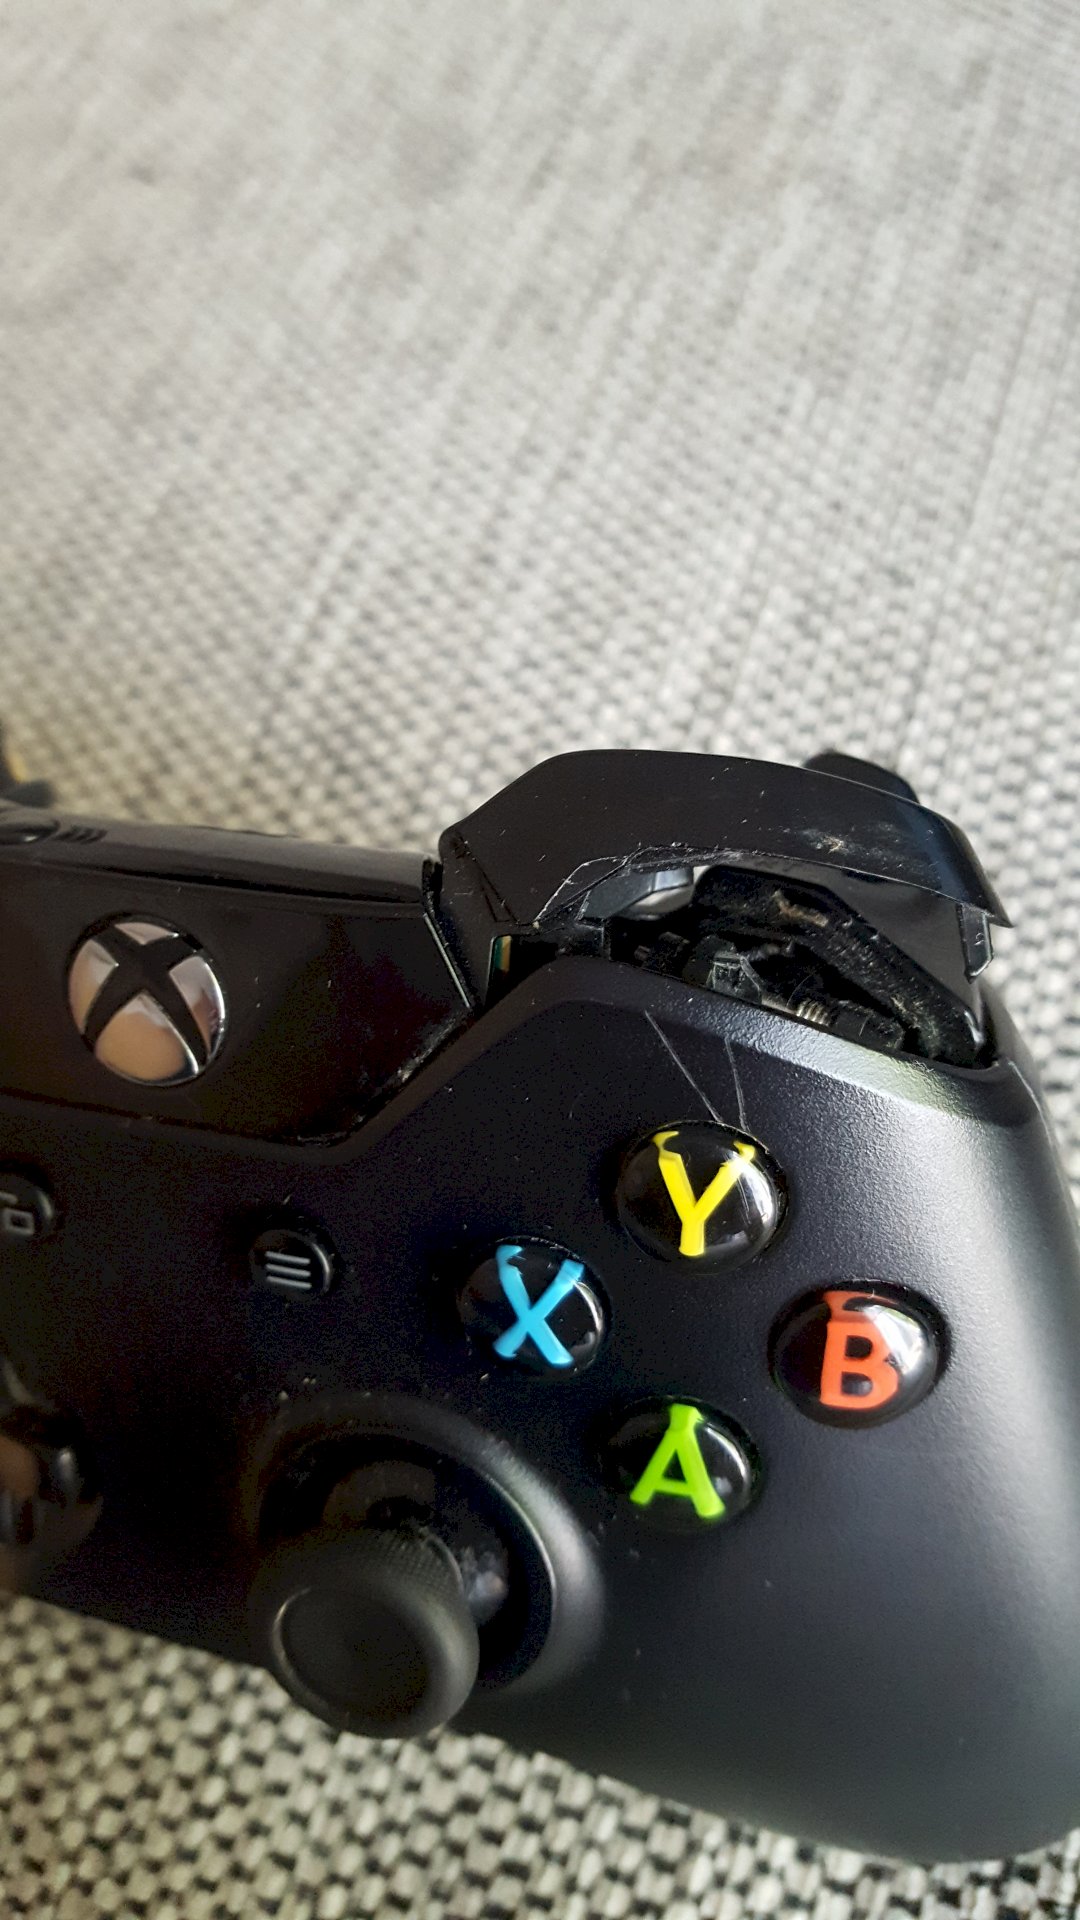 shattered xbox controllers